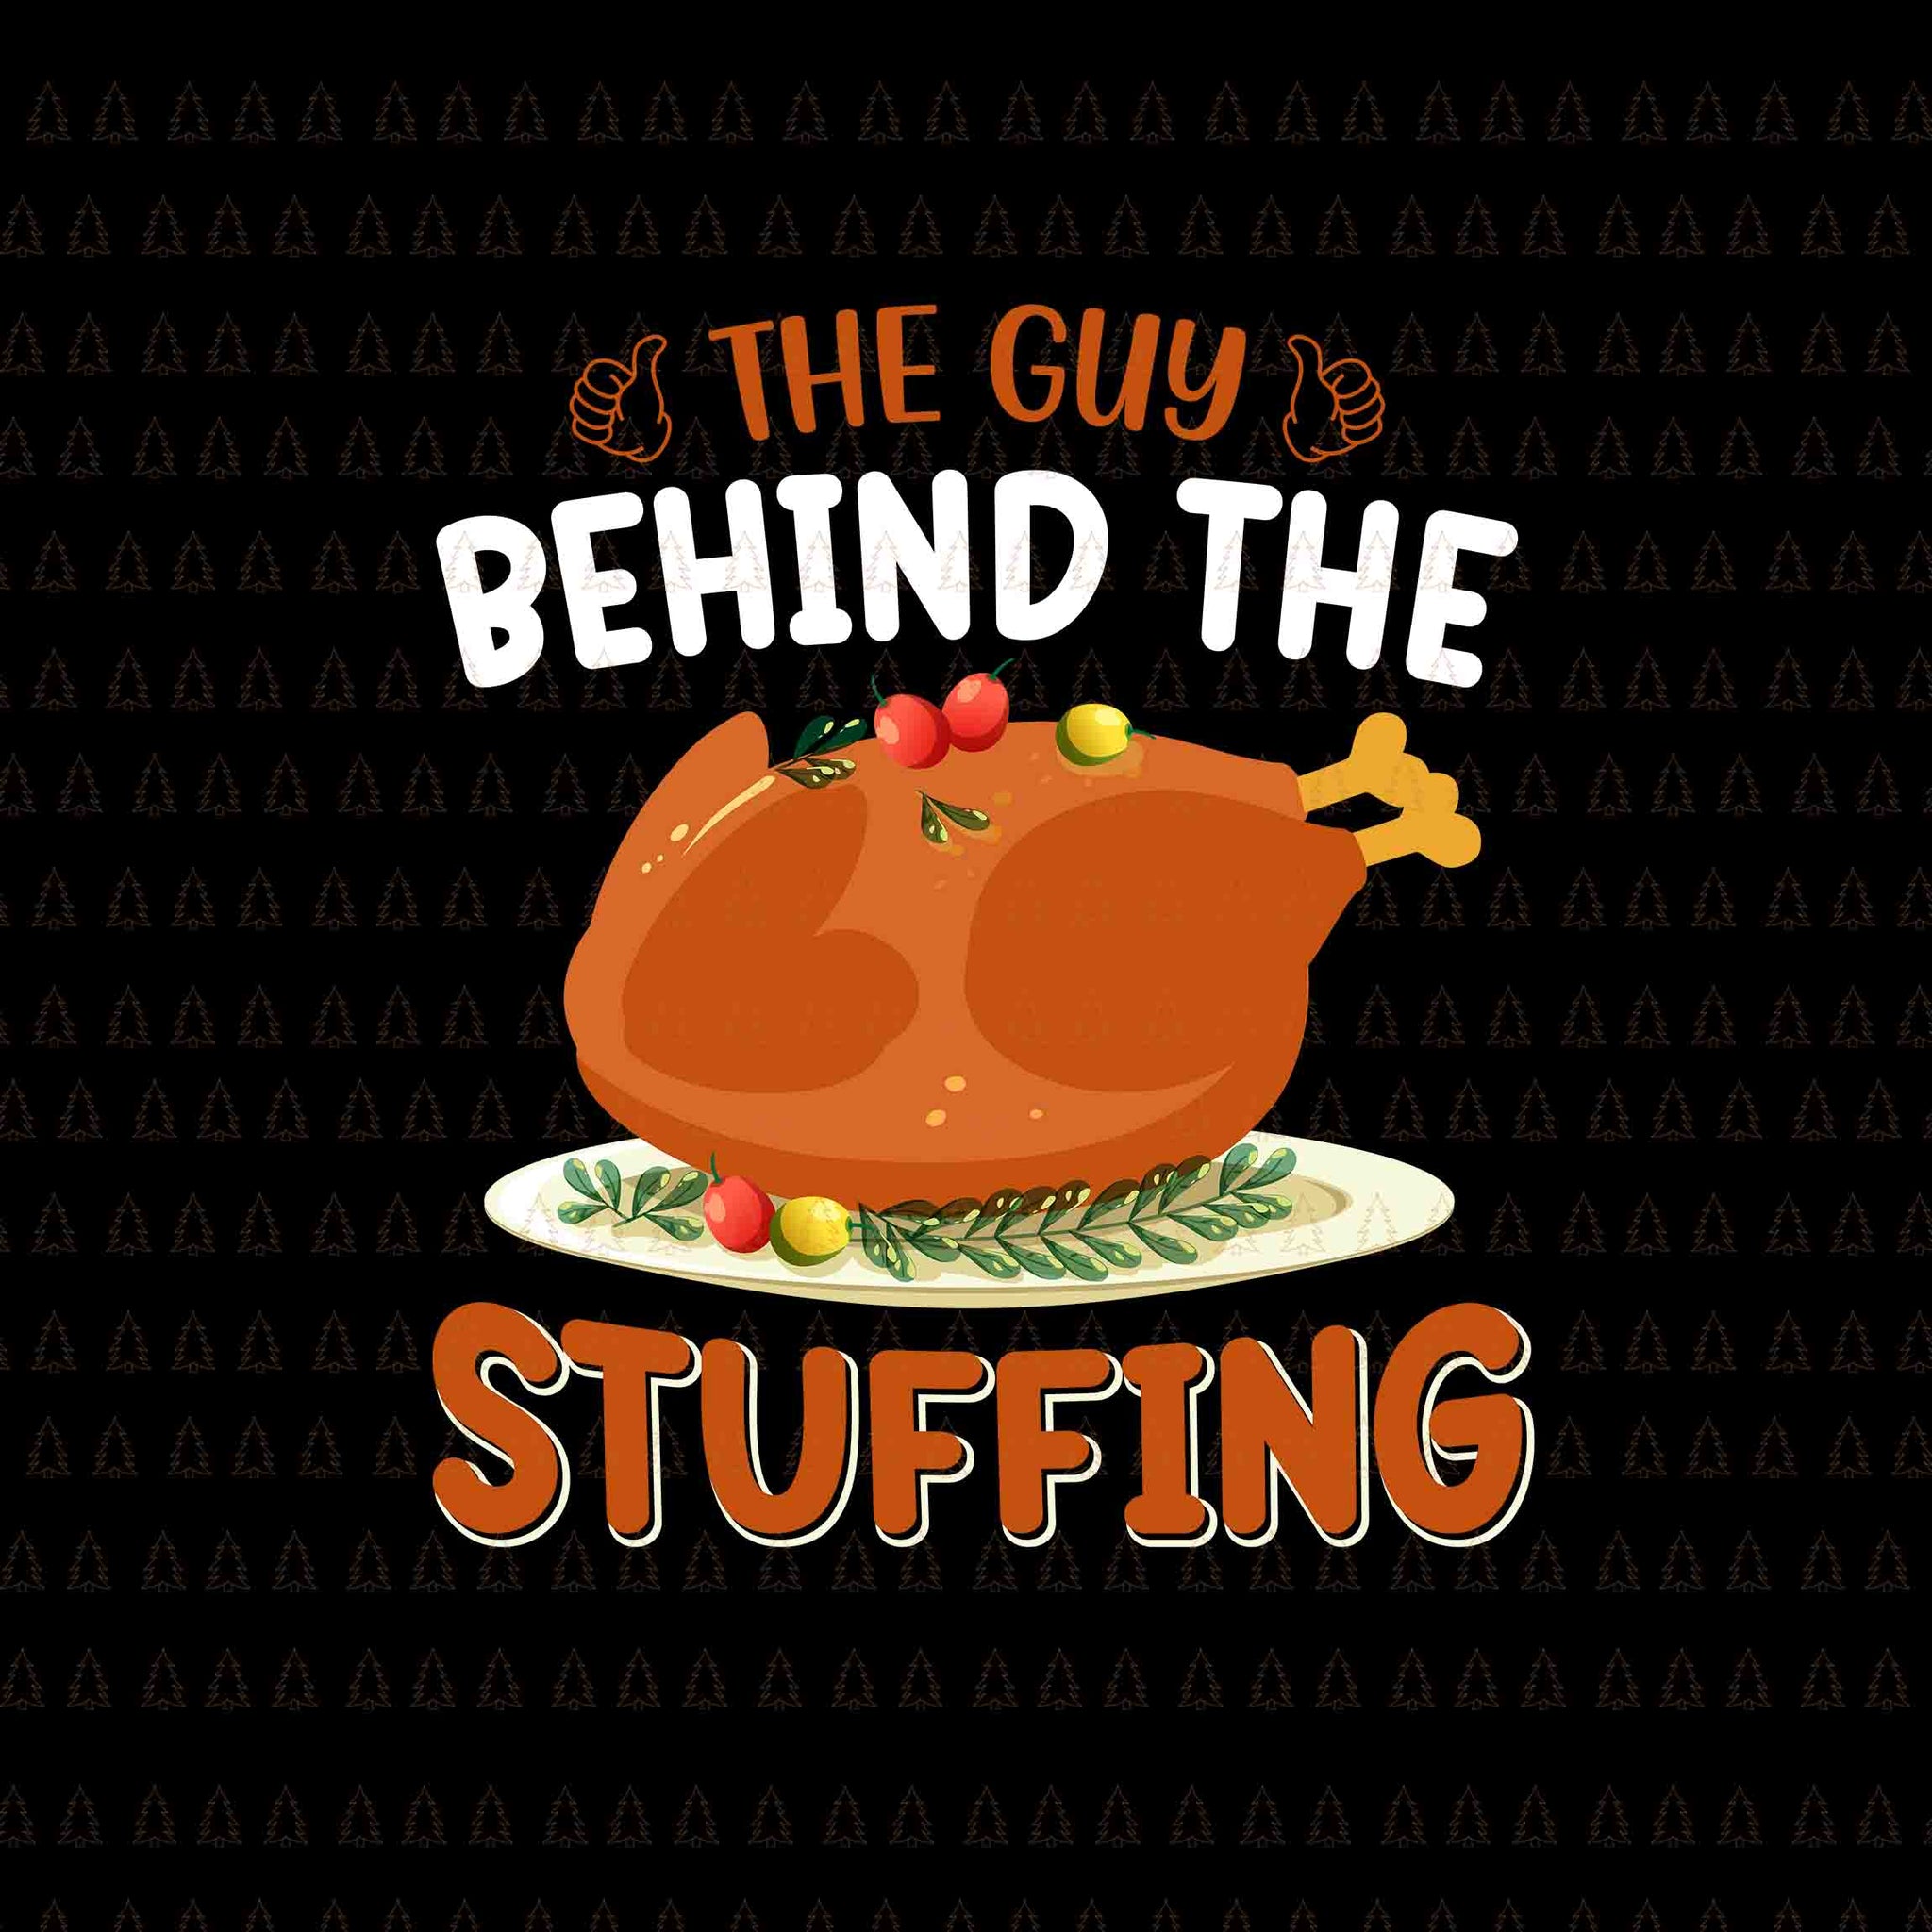 The Guy Behind The Stuffing Svg, Happy Thanksgiving Svg, Turkey Svg, Turkey Day Svg, Thanksgiving Svg, Thanksgiving Turkey Svg, Thanksgiving 2021 Svg